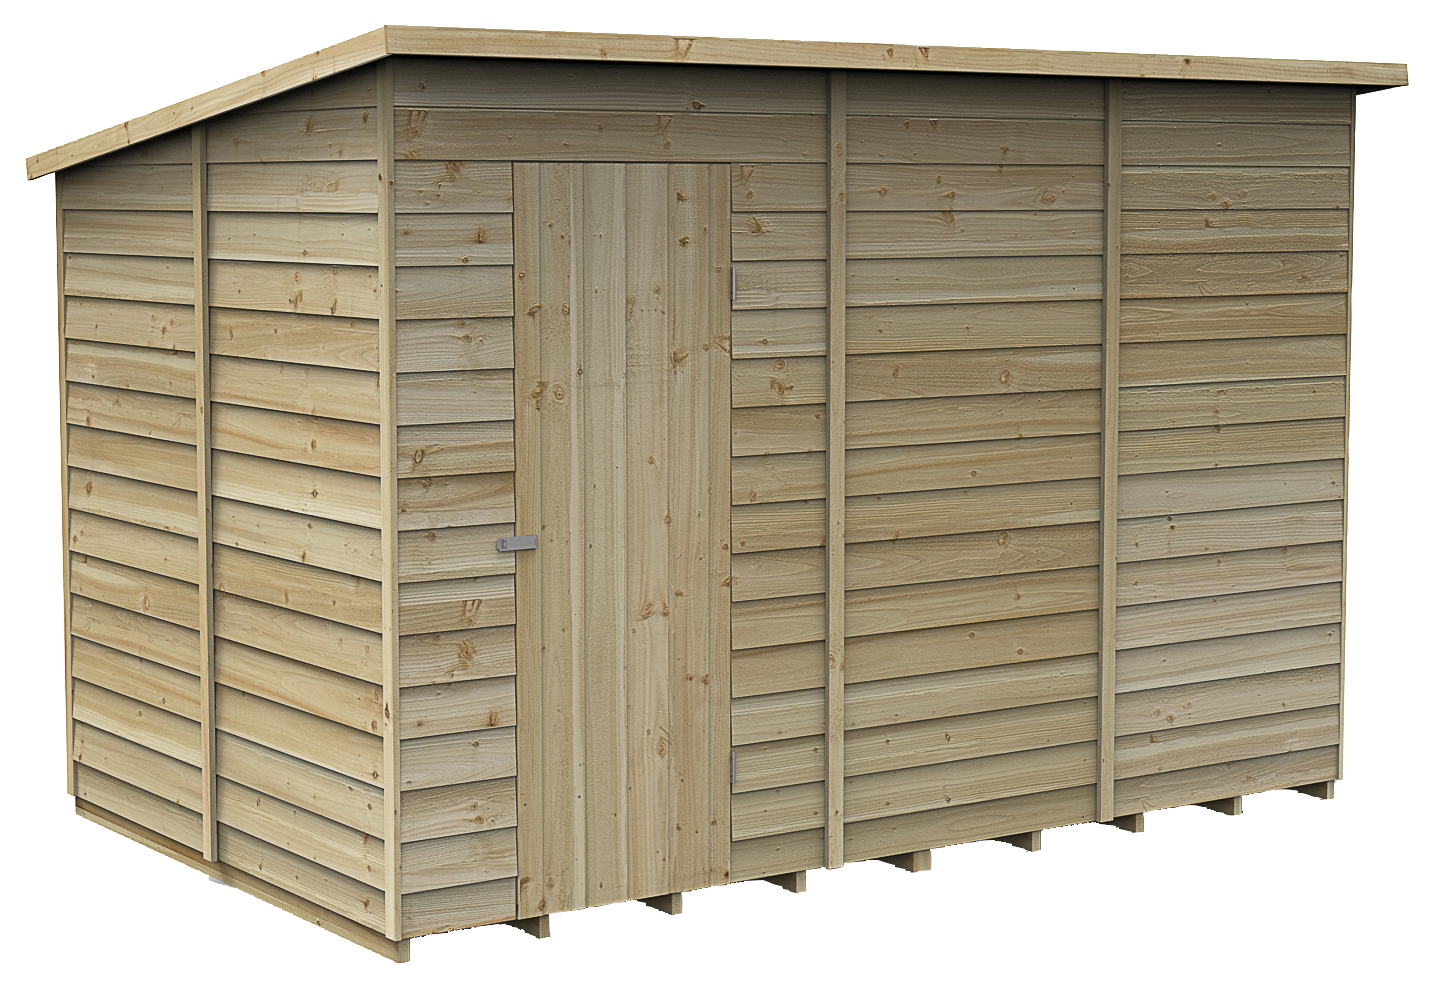 Forest Garden 10 x 6ft 4Life Pent Overlap Pressure Treated Windowless Shed